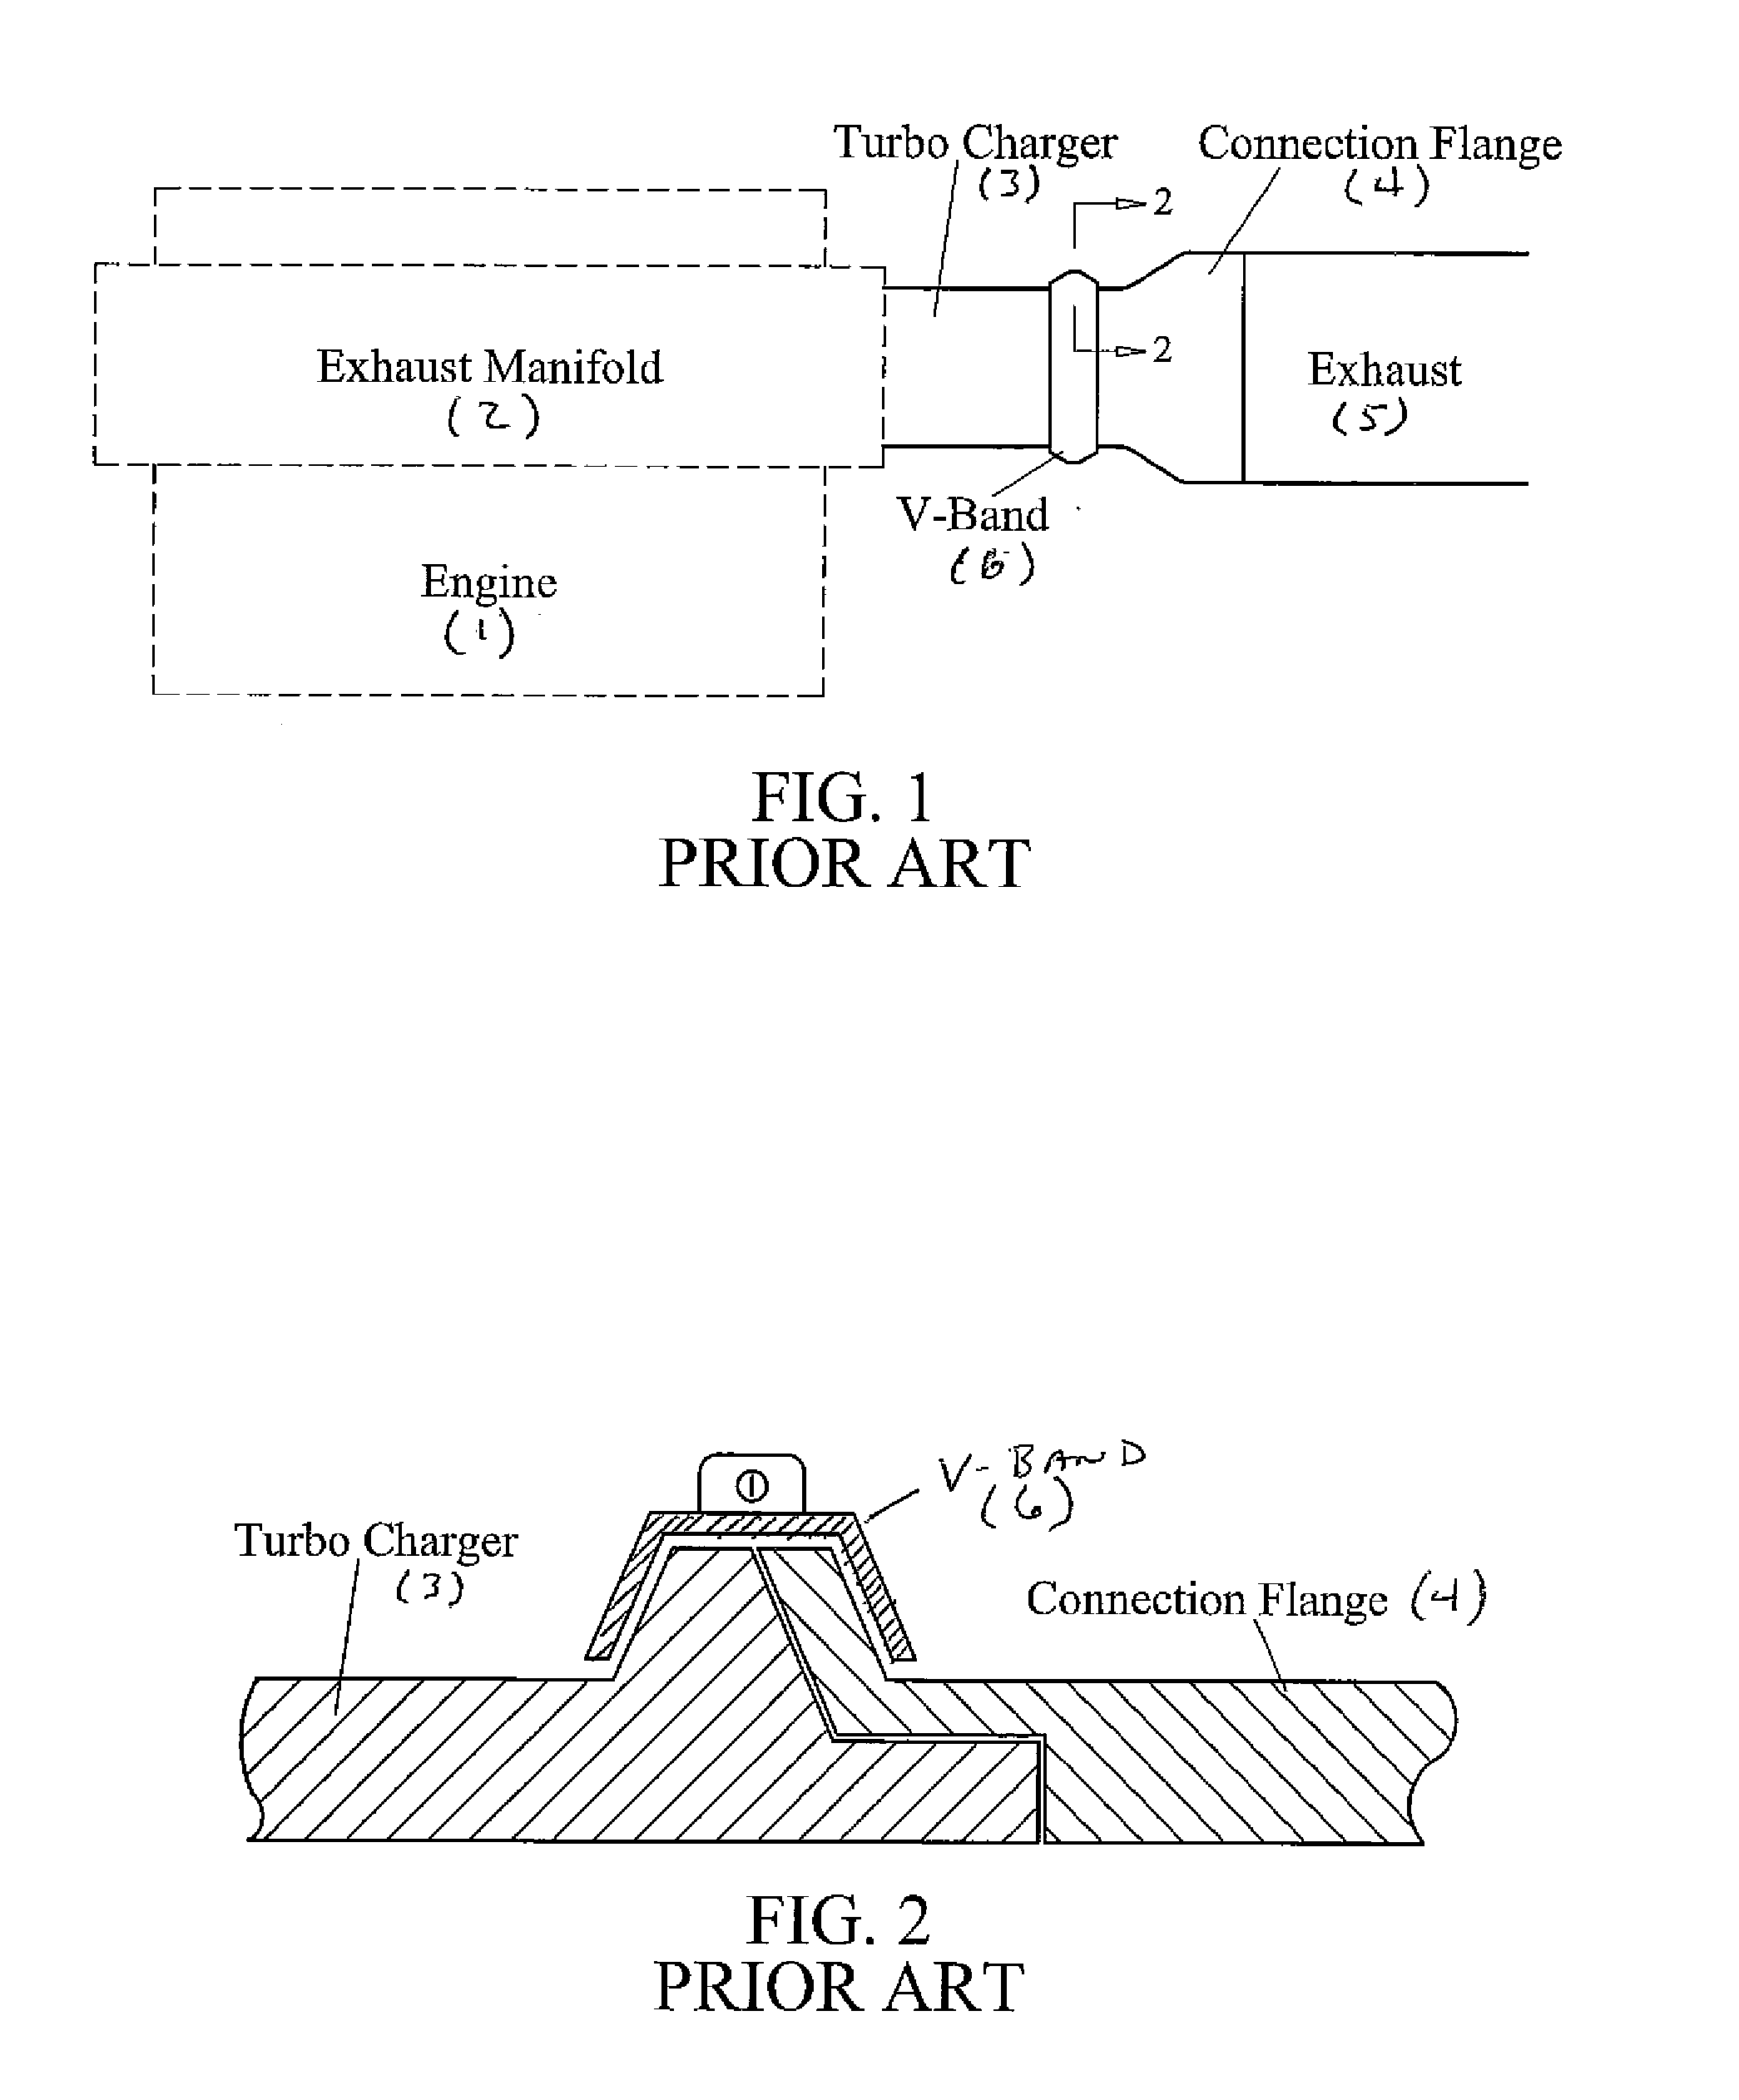 Gasketed connection of marine engine exhaust outlet to exhaust conduit